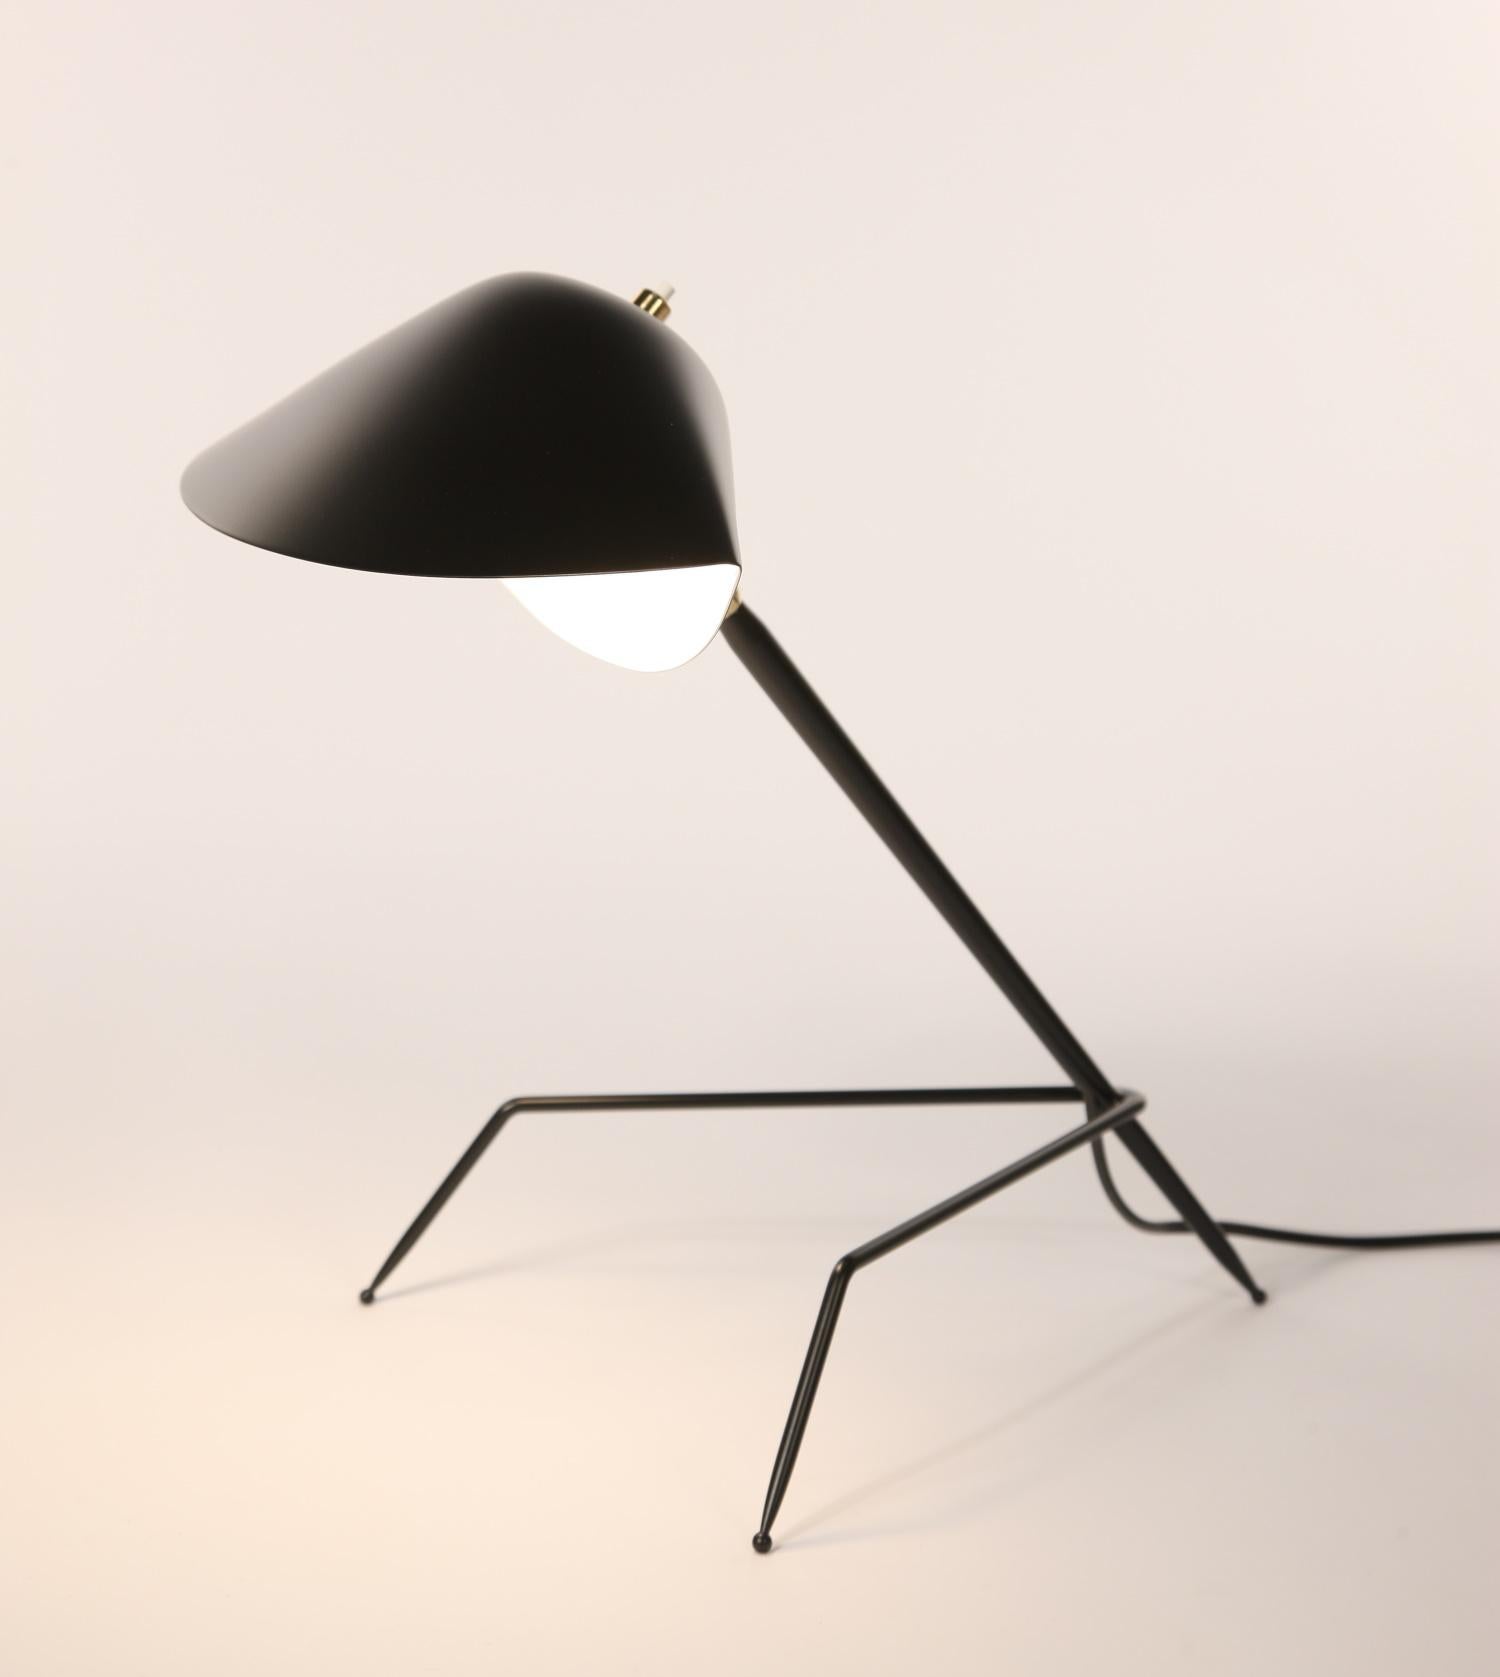 DESCRIPTION:
This desk lamp is a certified re-edition, produced by the family of Serge Mouille on the site of his original workshop.

The shade of this lamp is modeled after a “moule” or mussel shell. The arm is connected by a brass swivel and